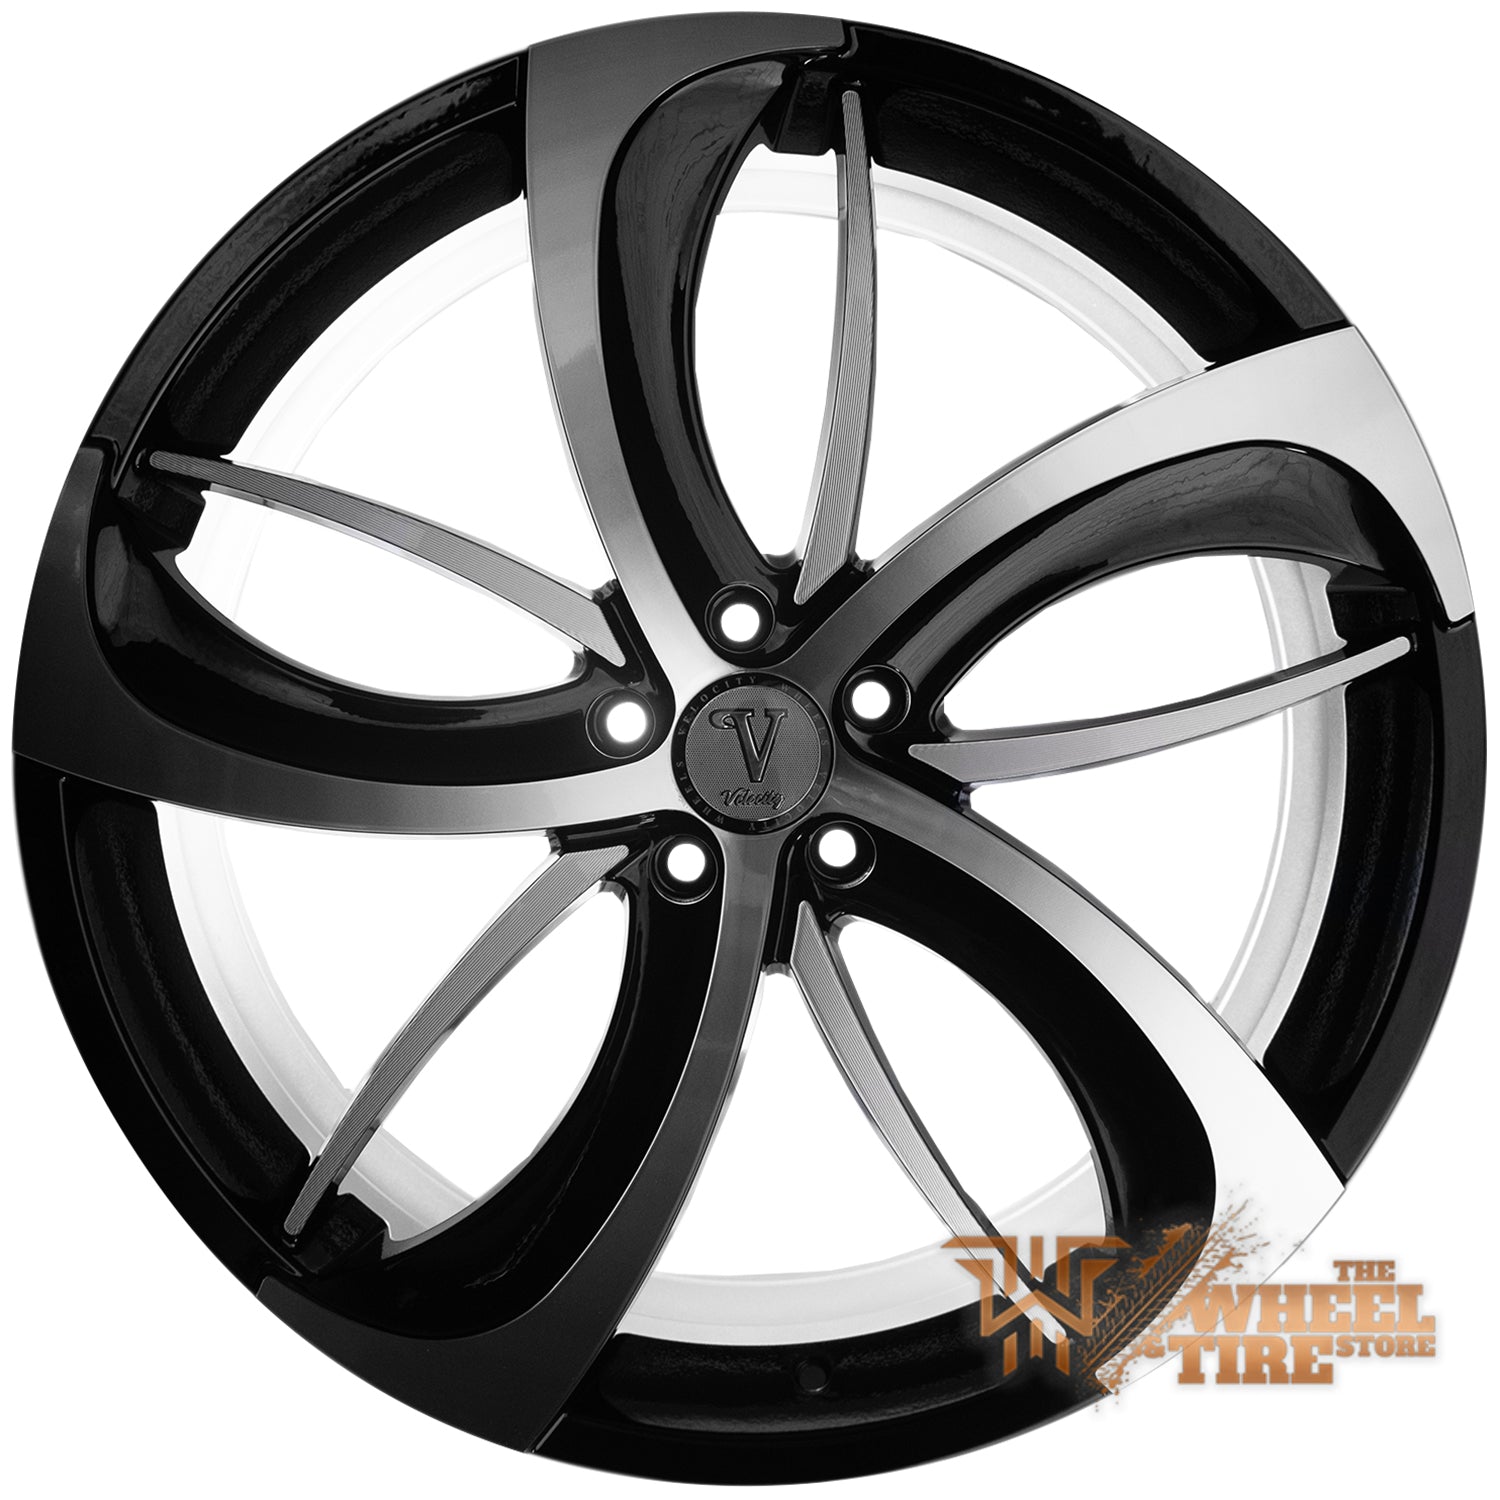 VELOCITY VW26 Wheel in Black Machined and Milled (Set of 4)